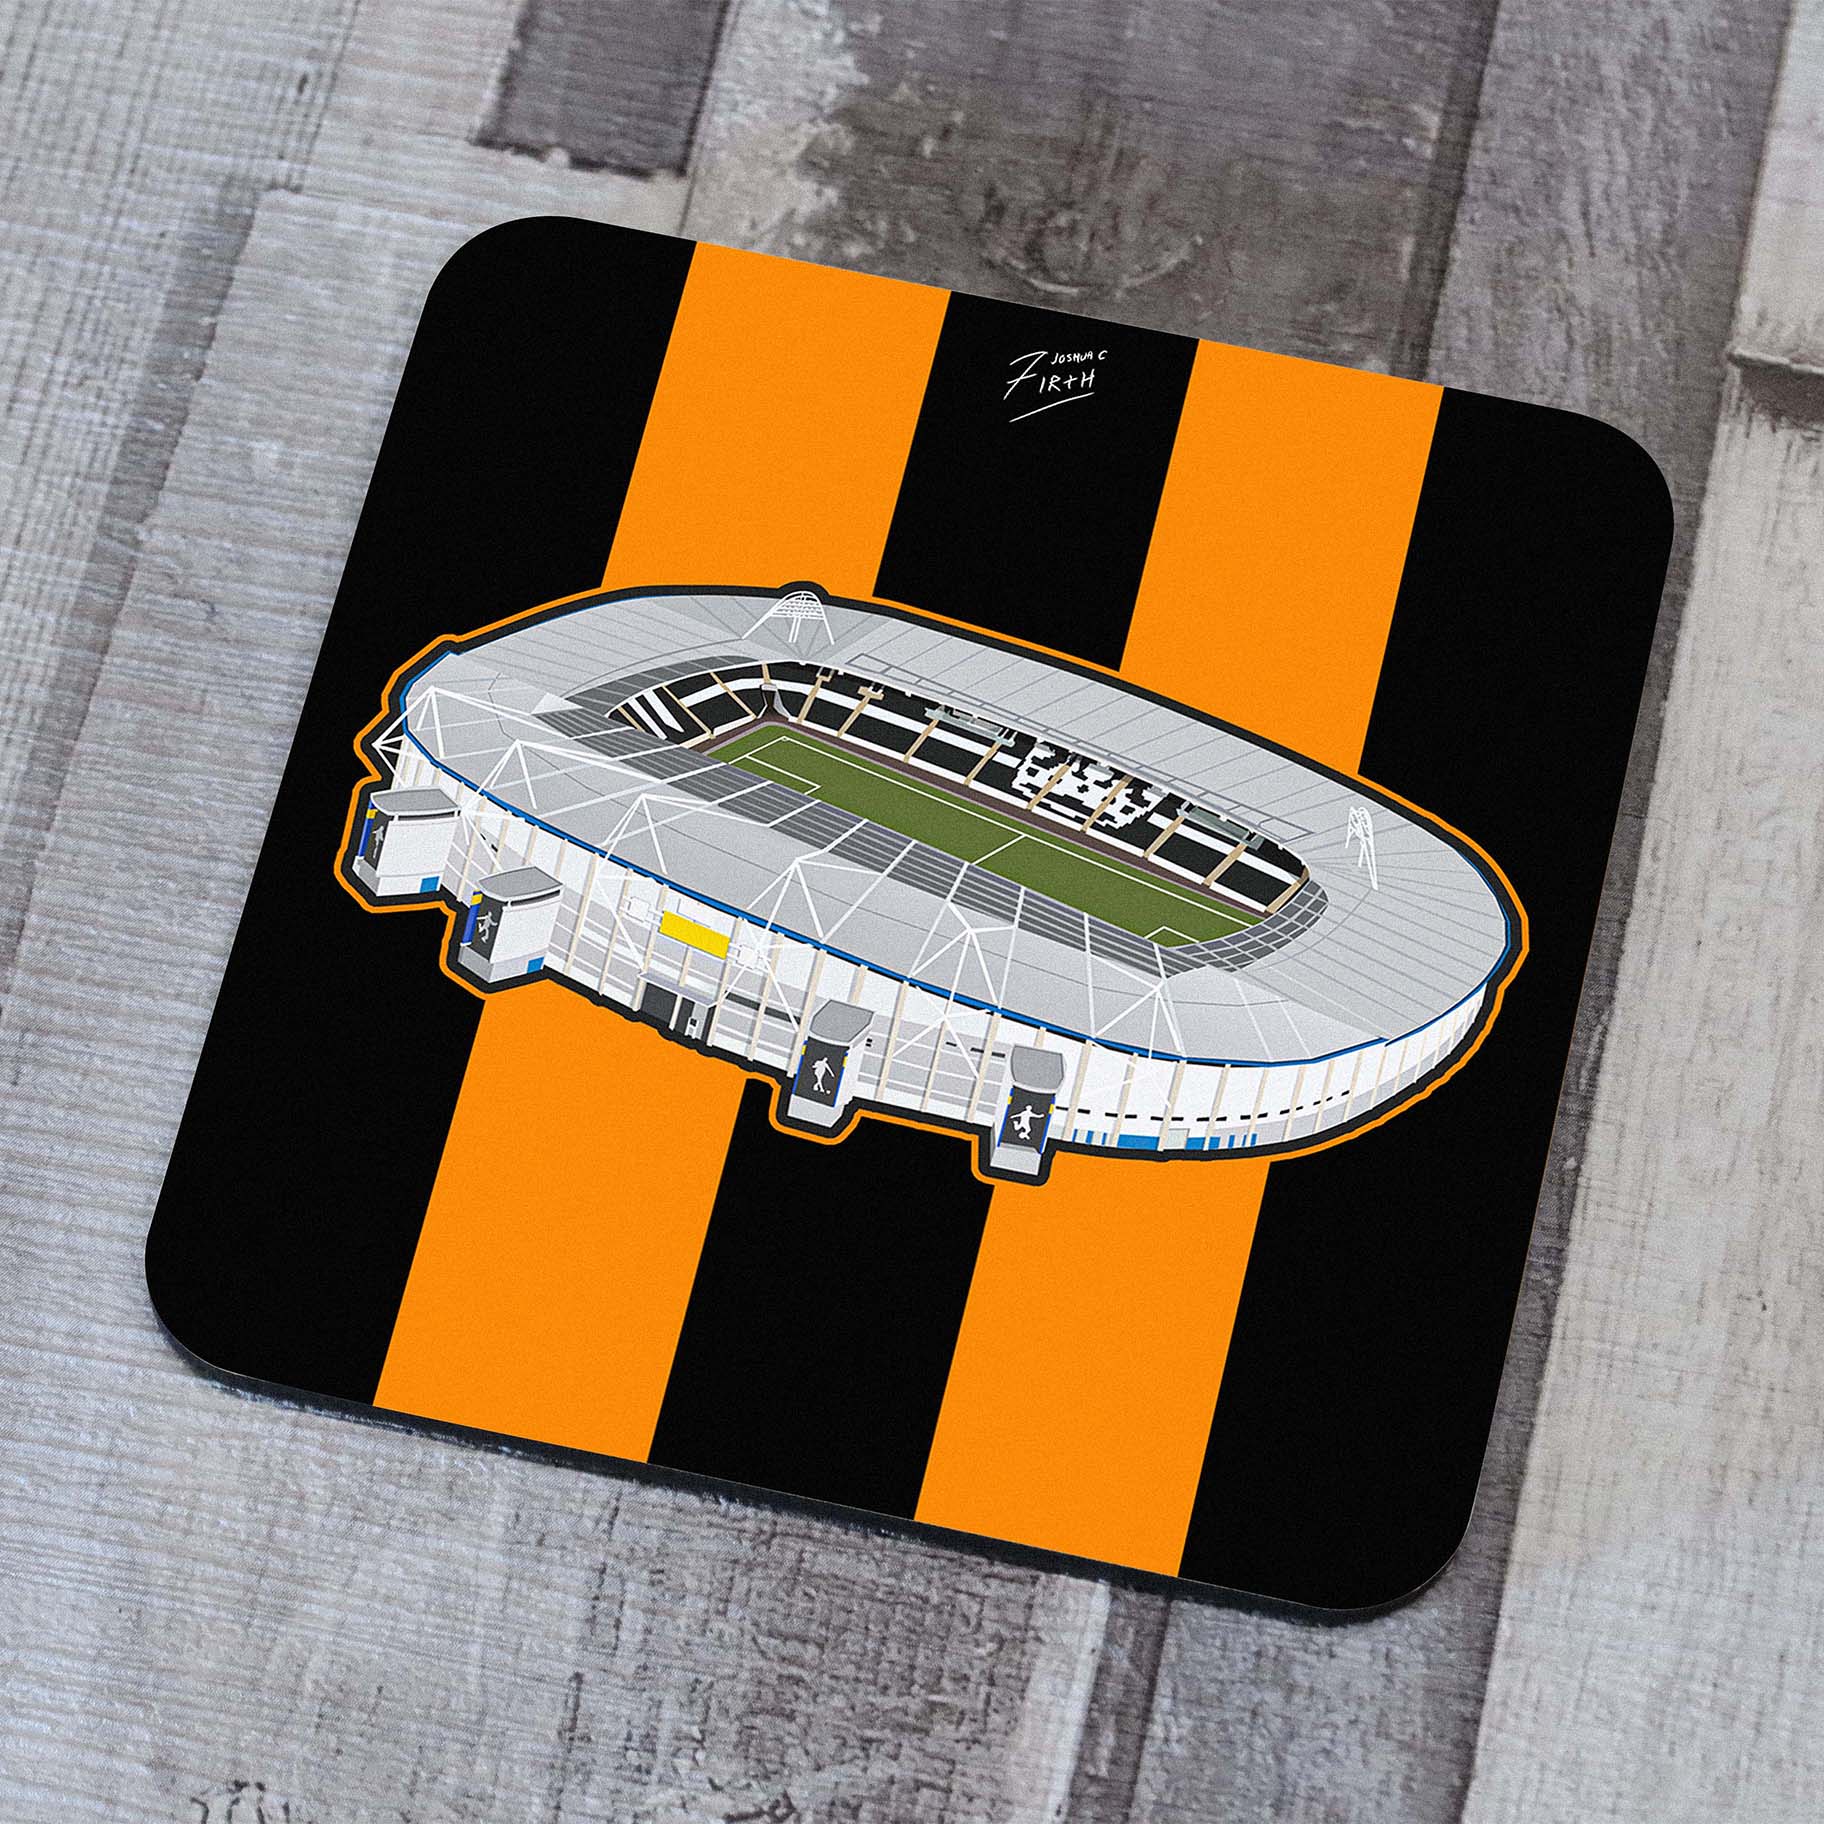 Home of the Tigers, a Hull City Football themed coaster of the MKM Stadium, formerly the KCOM, in East Yorkshire